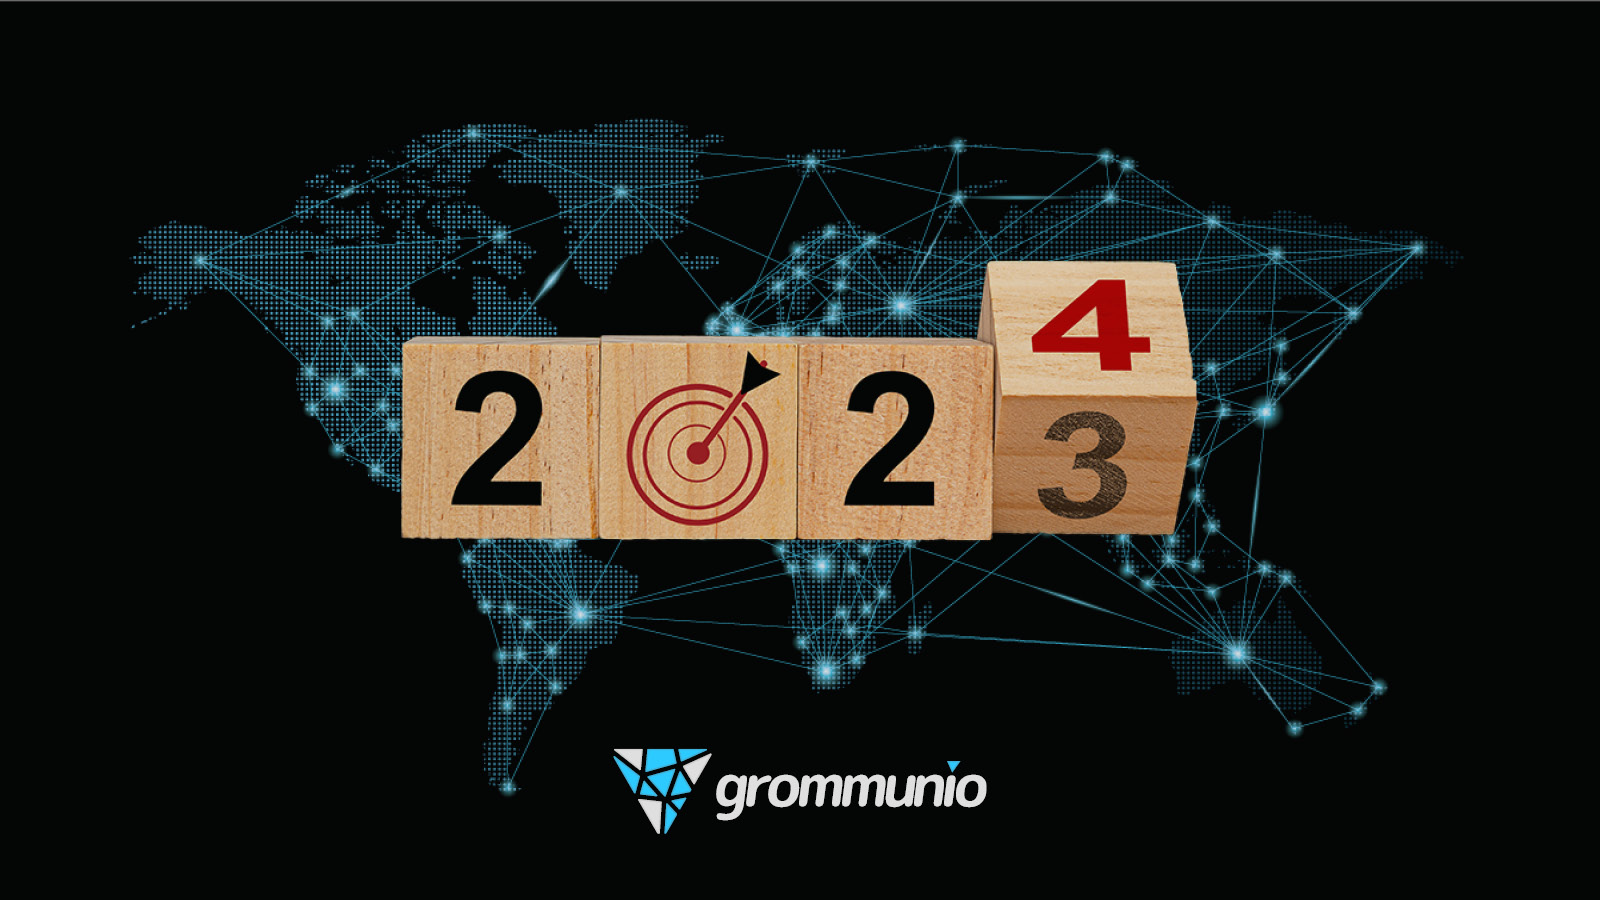 Three years later: More from grommunio